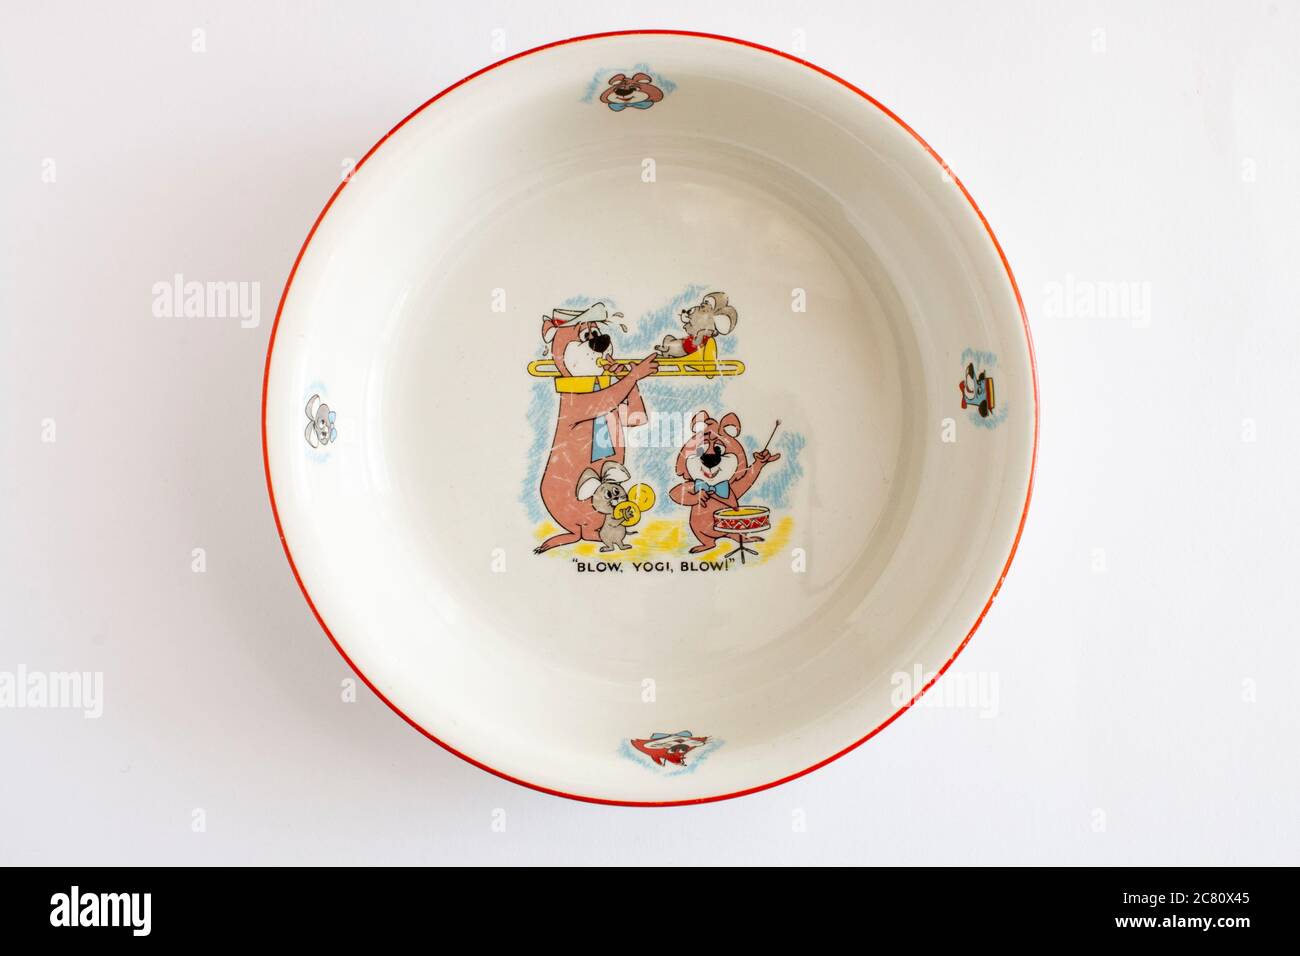 Circa 1960 children's china bowl with Hanna Barbera characters on, including Yogi Bear, Huckleberry Hound and Pixie and Dixie with Mr Jinks Stock Photo